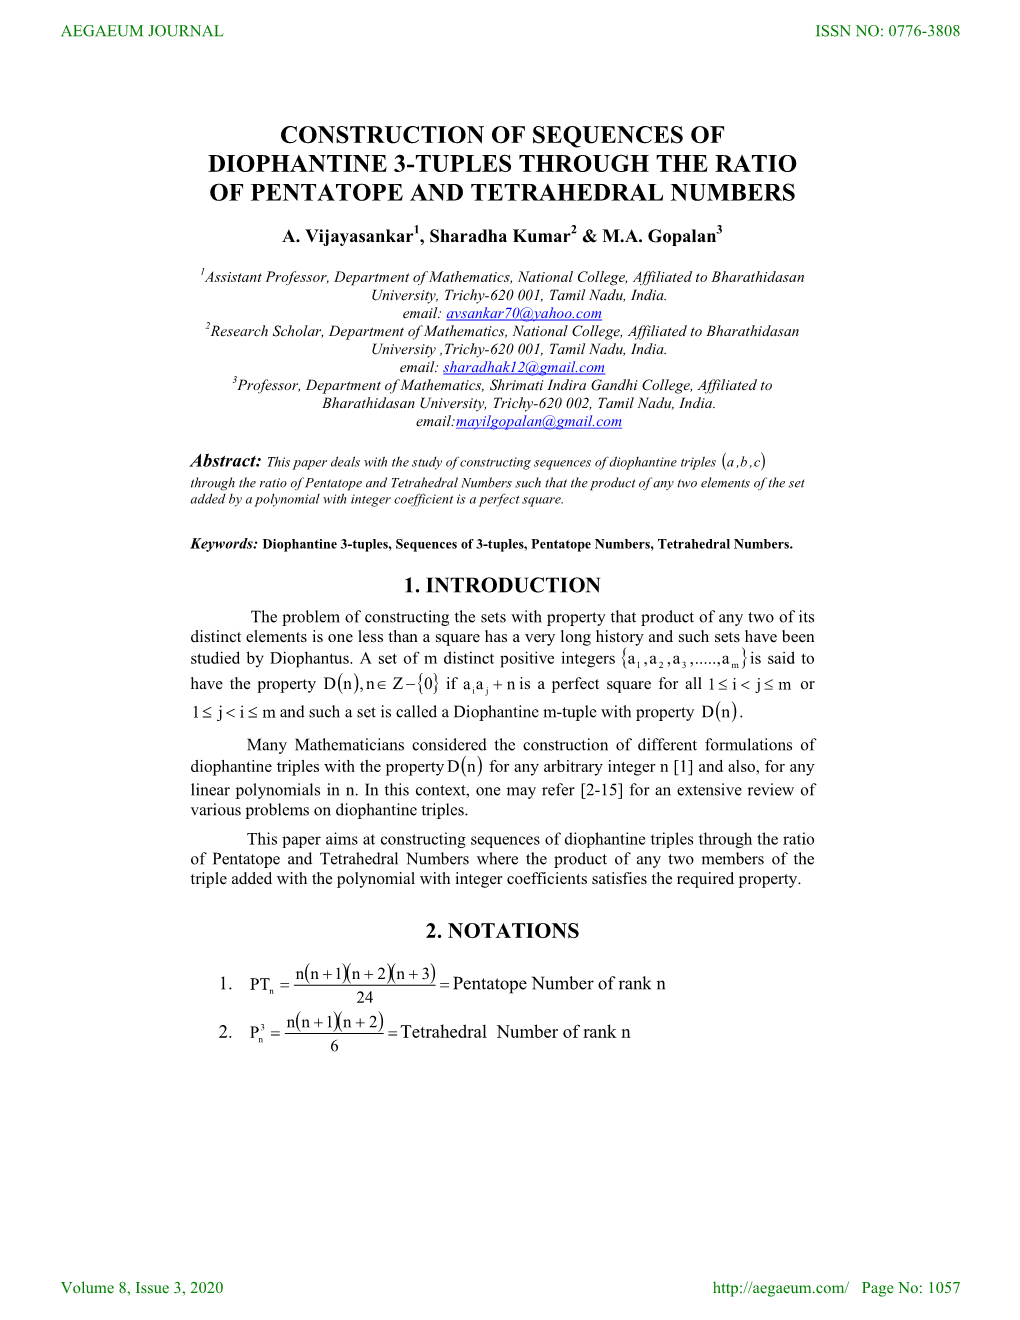 Construction of Sequences of Diophantine 3-Tuples Through the Ratio of Pentatope and Tetrahedral Numbers